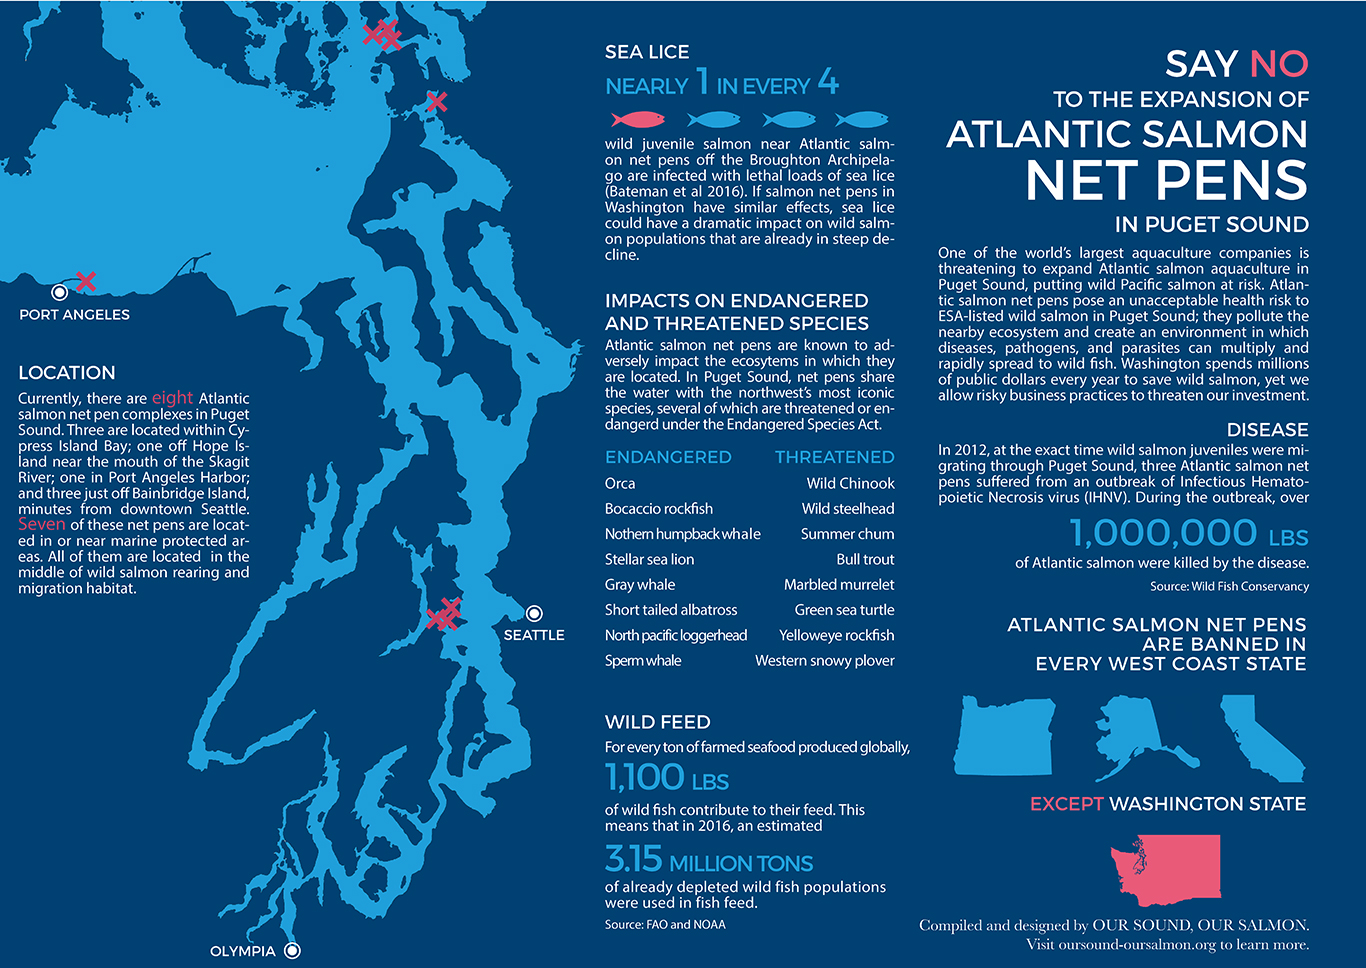 Say no to the expansion of Atlantic salmon net pens in Puget Sound